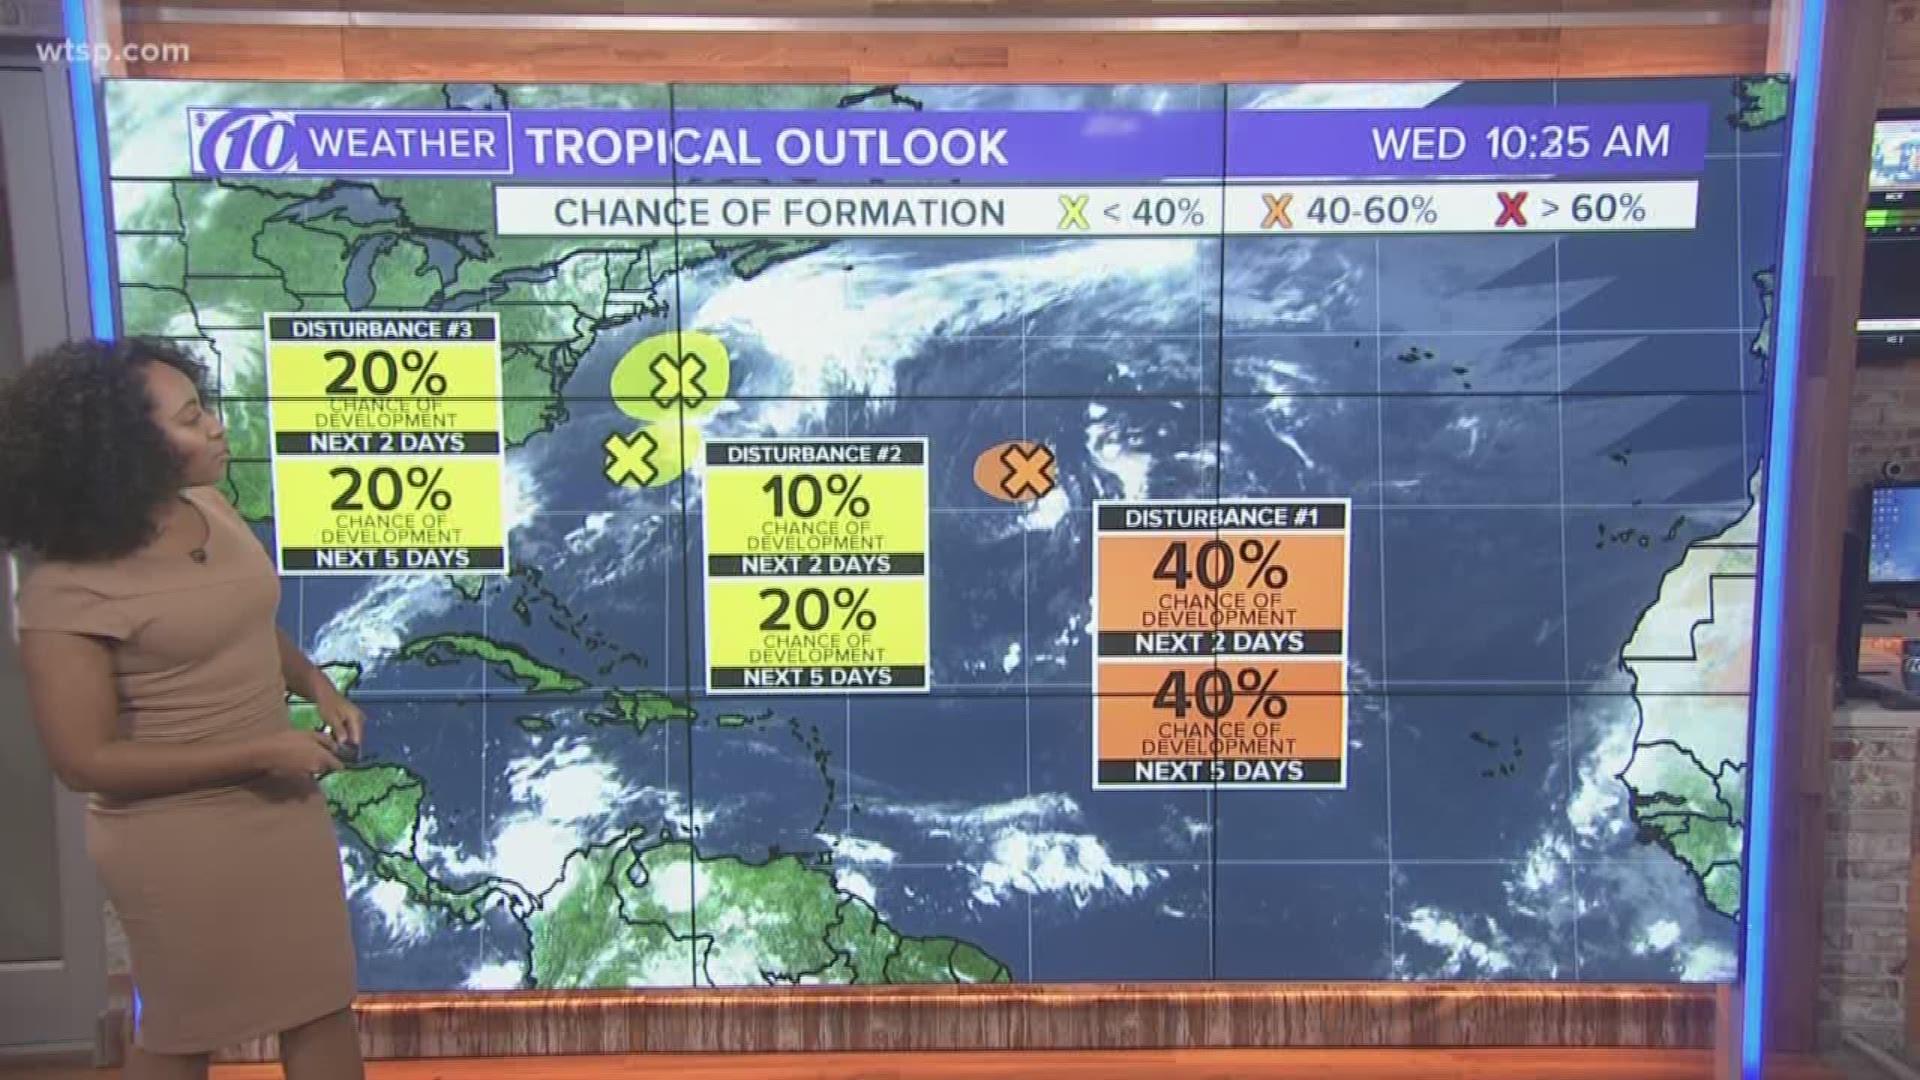 One system could develop into a tropical depression or storm during the next day or two. https://bit.ly/35fxm4M